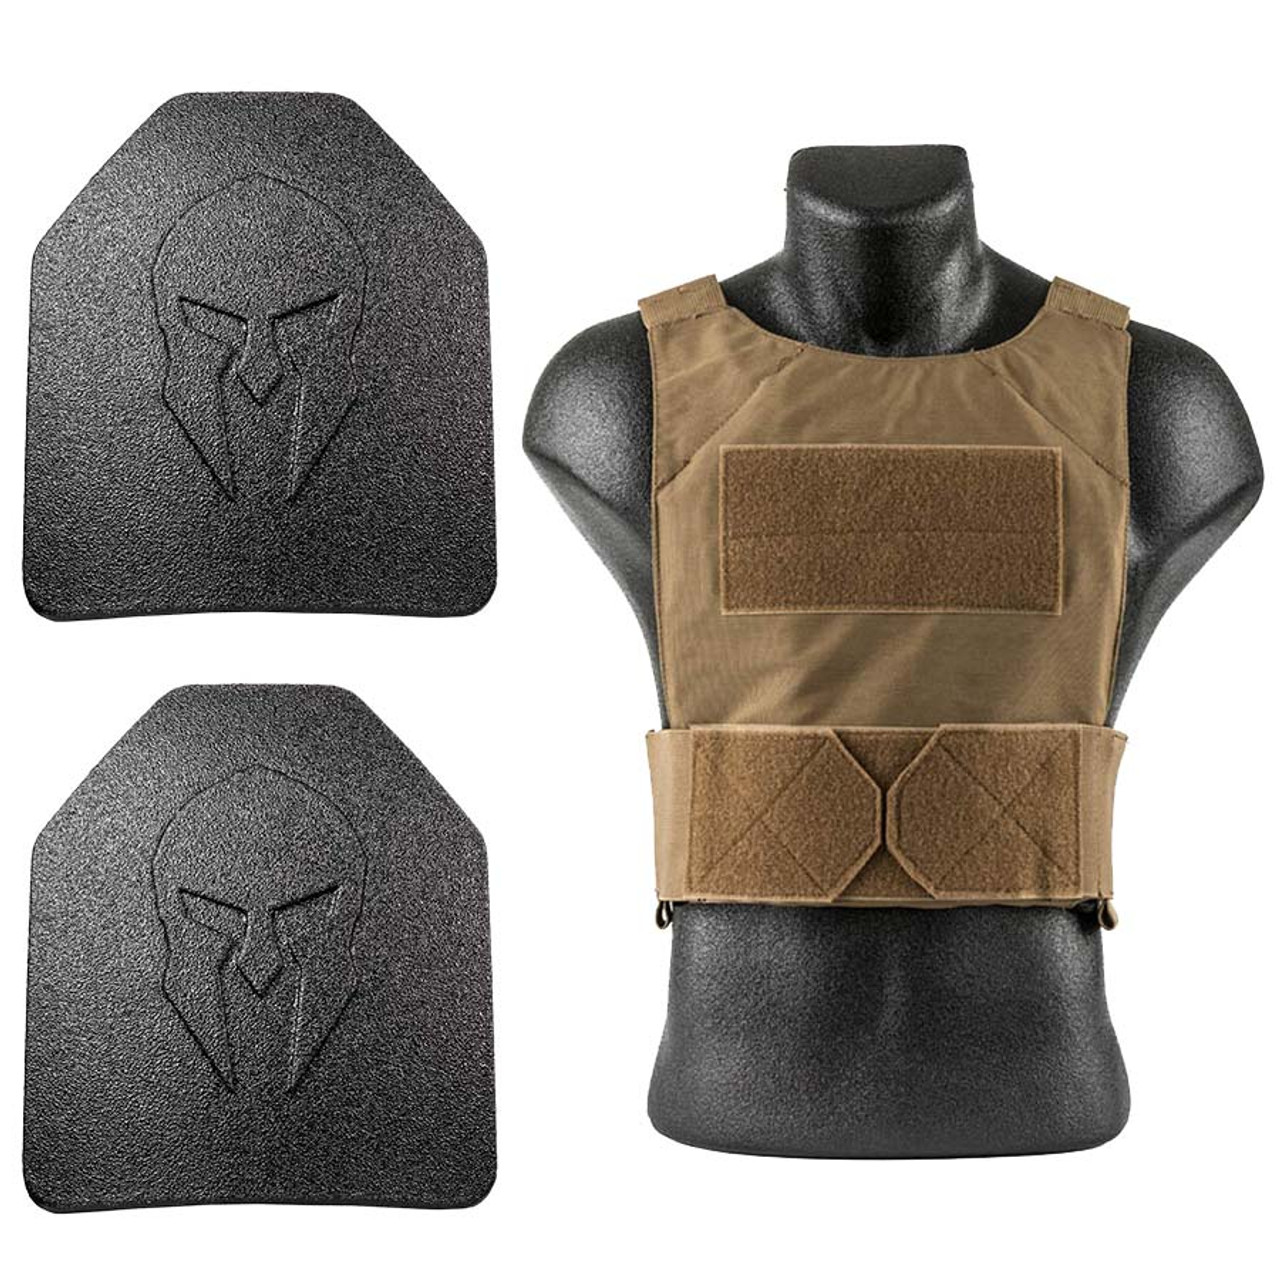 New] The 10 Best Home Decor (with Pictures) - LV bulletproof vest